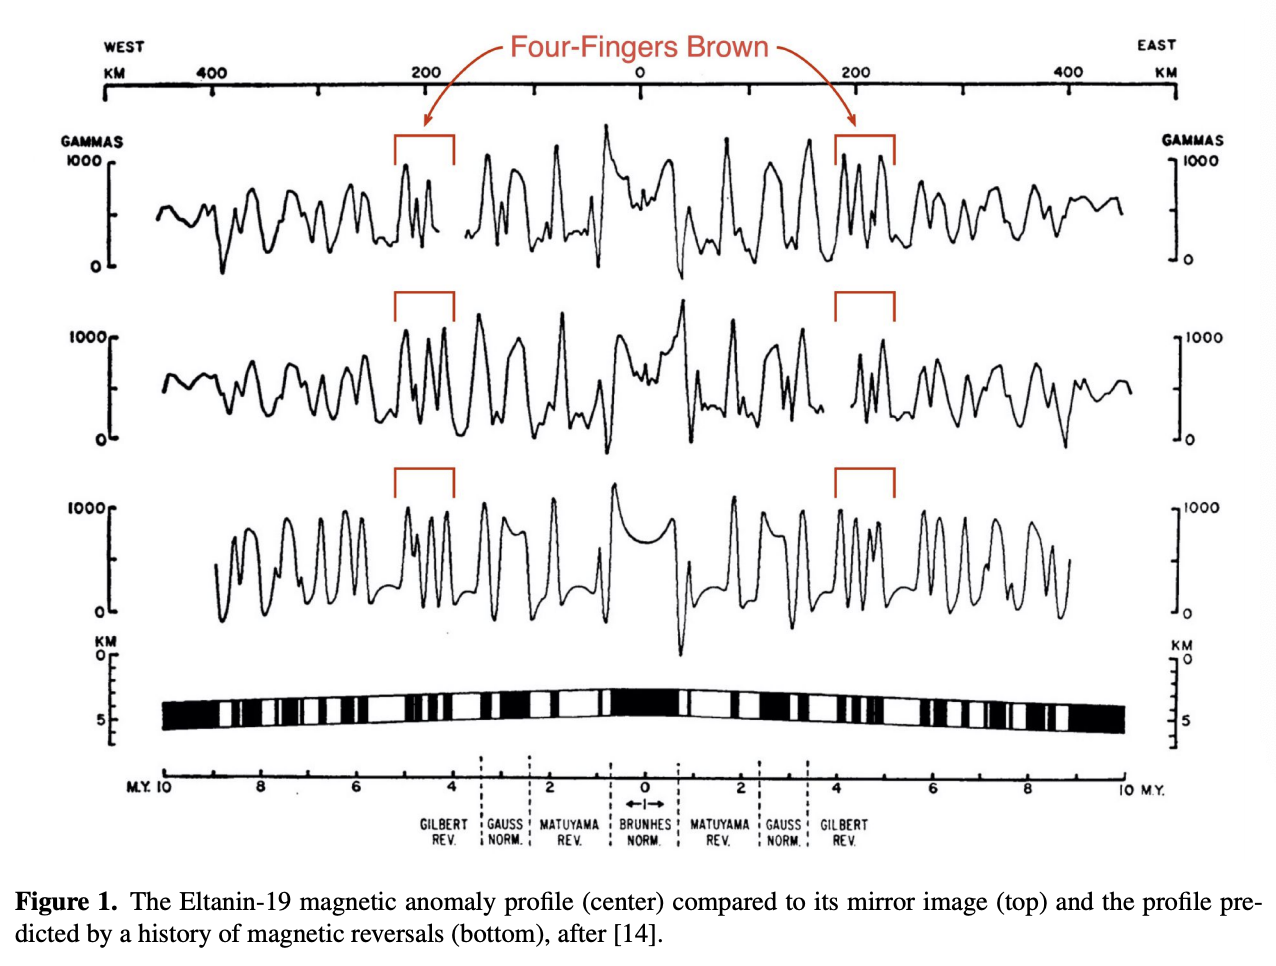 Figure 1. The Eltanin-19 magnetic anomaly profile (center) compared to its mirror image (top) and the profile predicted by a history of magnetic reversals (bottom), after [14].